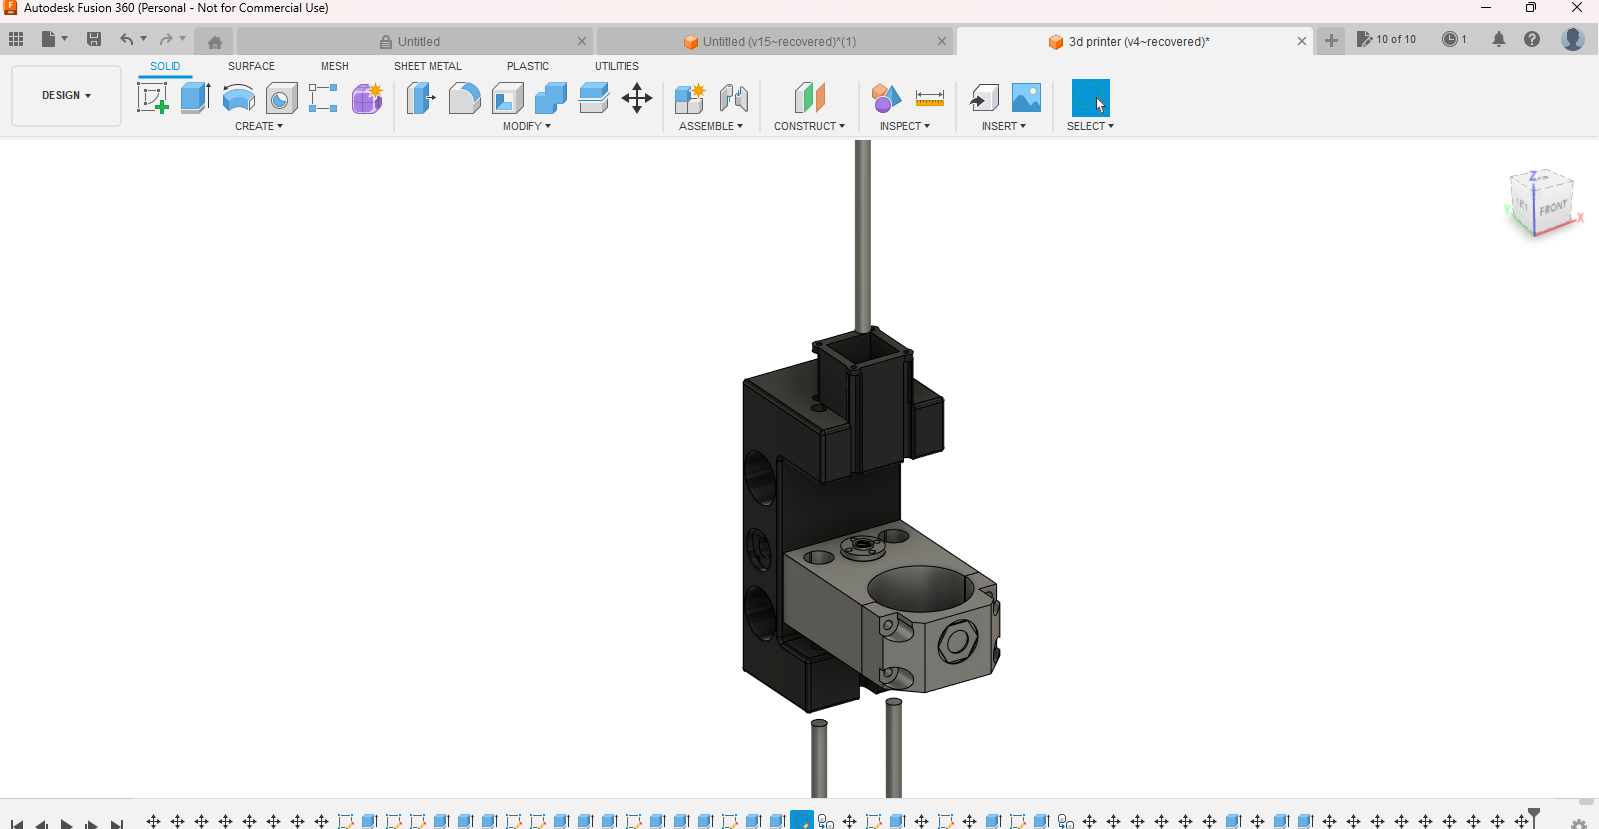 Autodesk Fusion 360 (Personal - Not for Commercial Use) 5_31_2023 7_40_48 PM.png